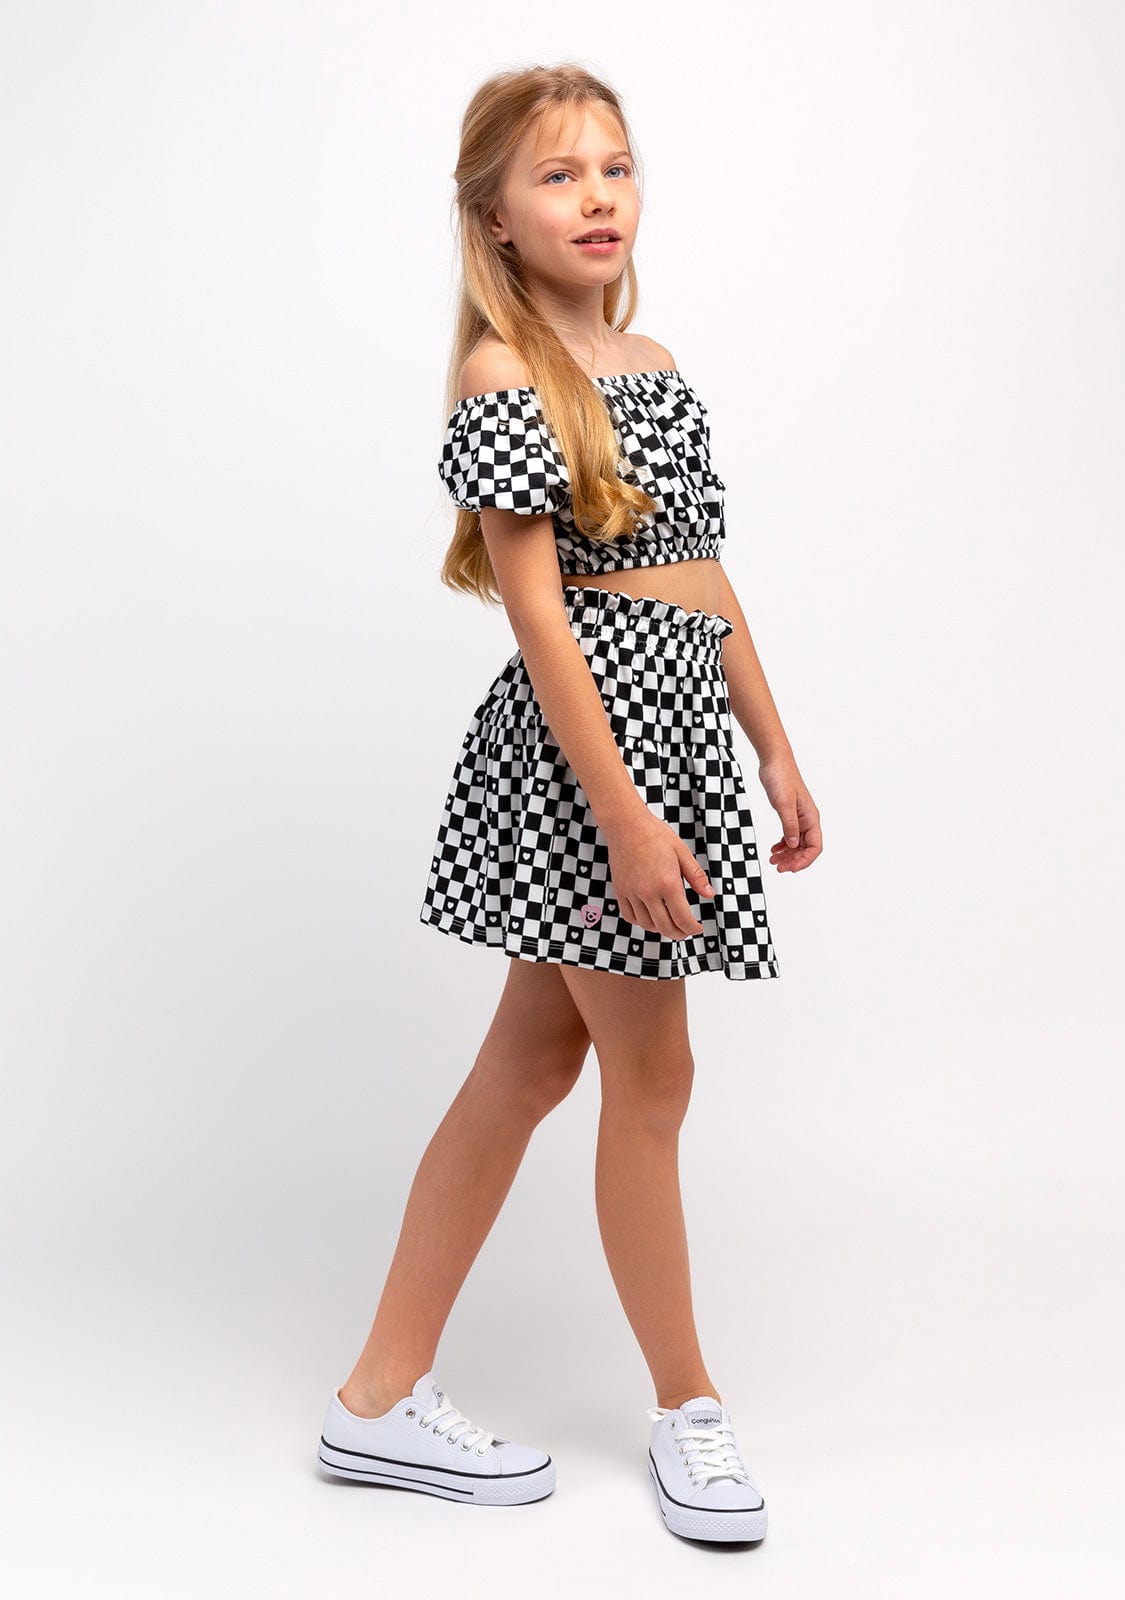 CONGUITOS TEXTIL Clothing Girl's Black Checkerboard Skirt